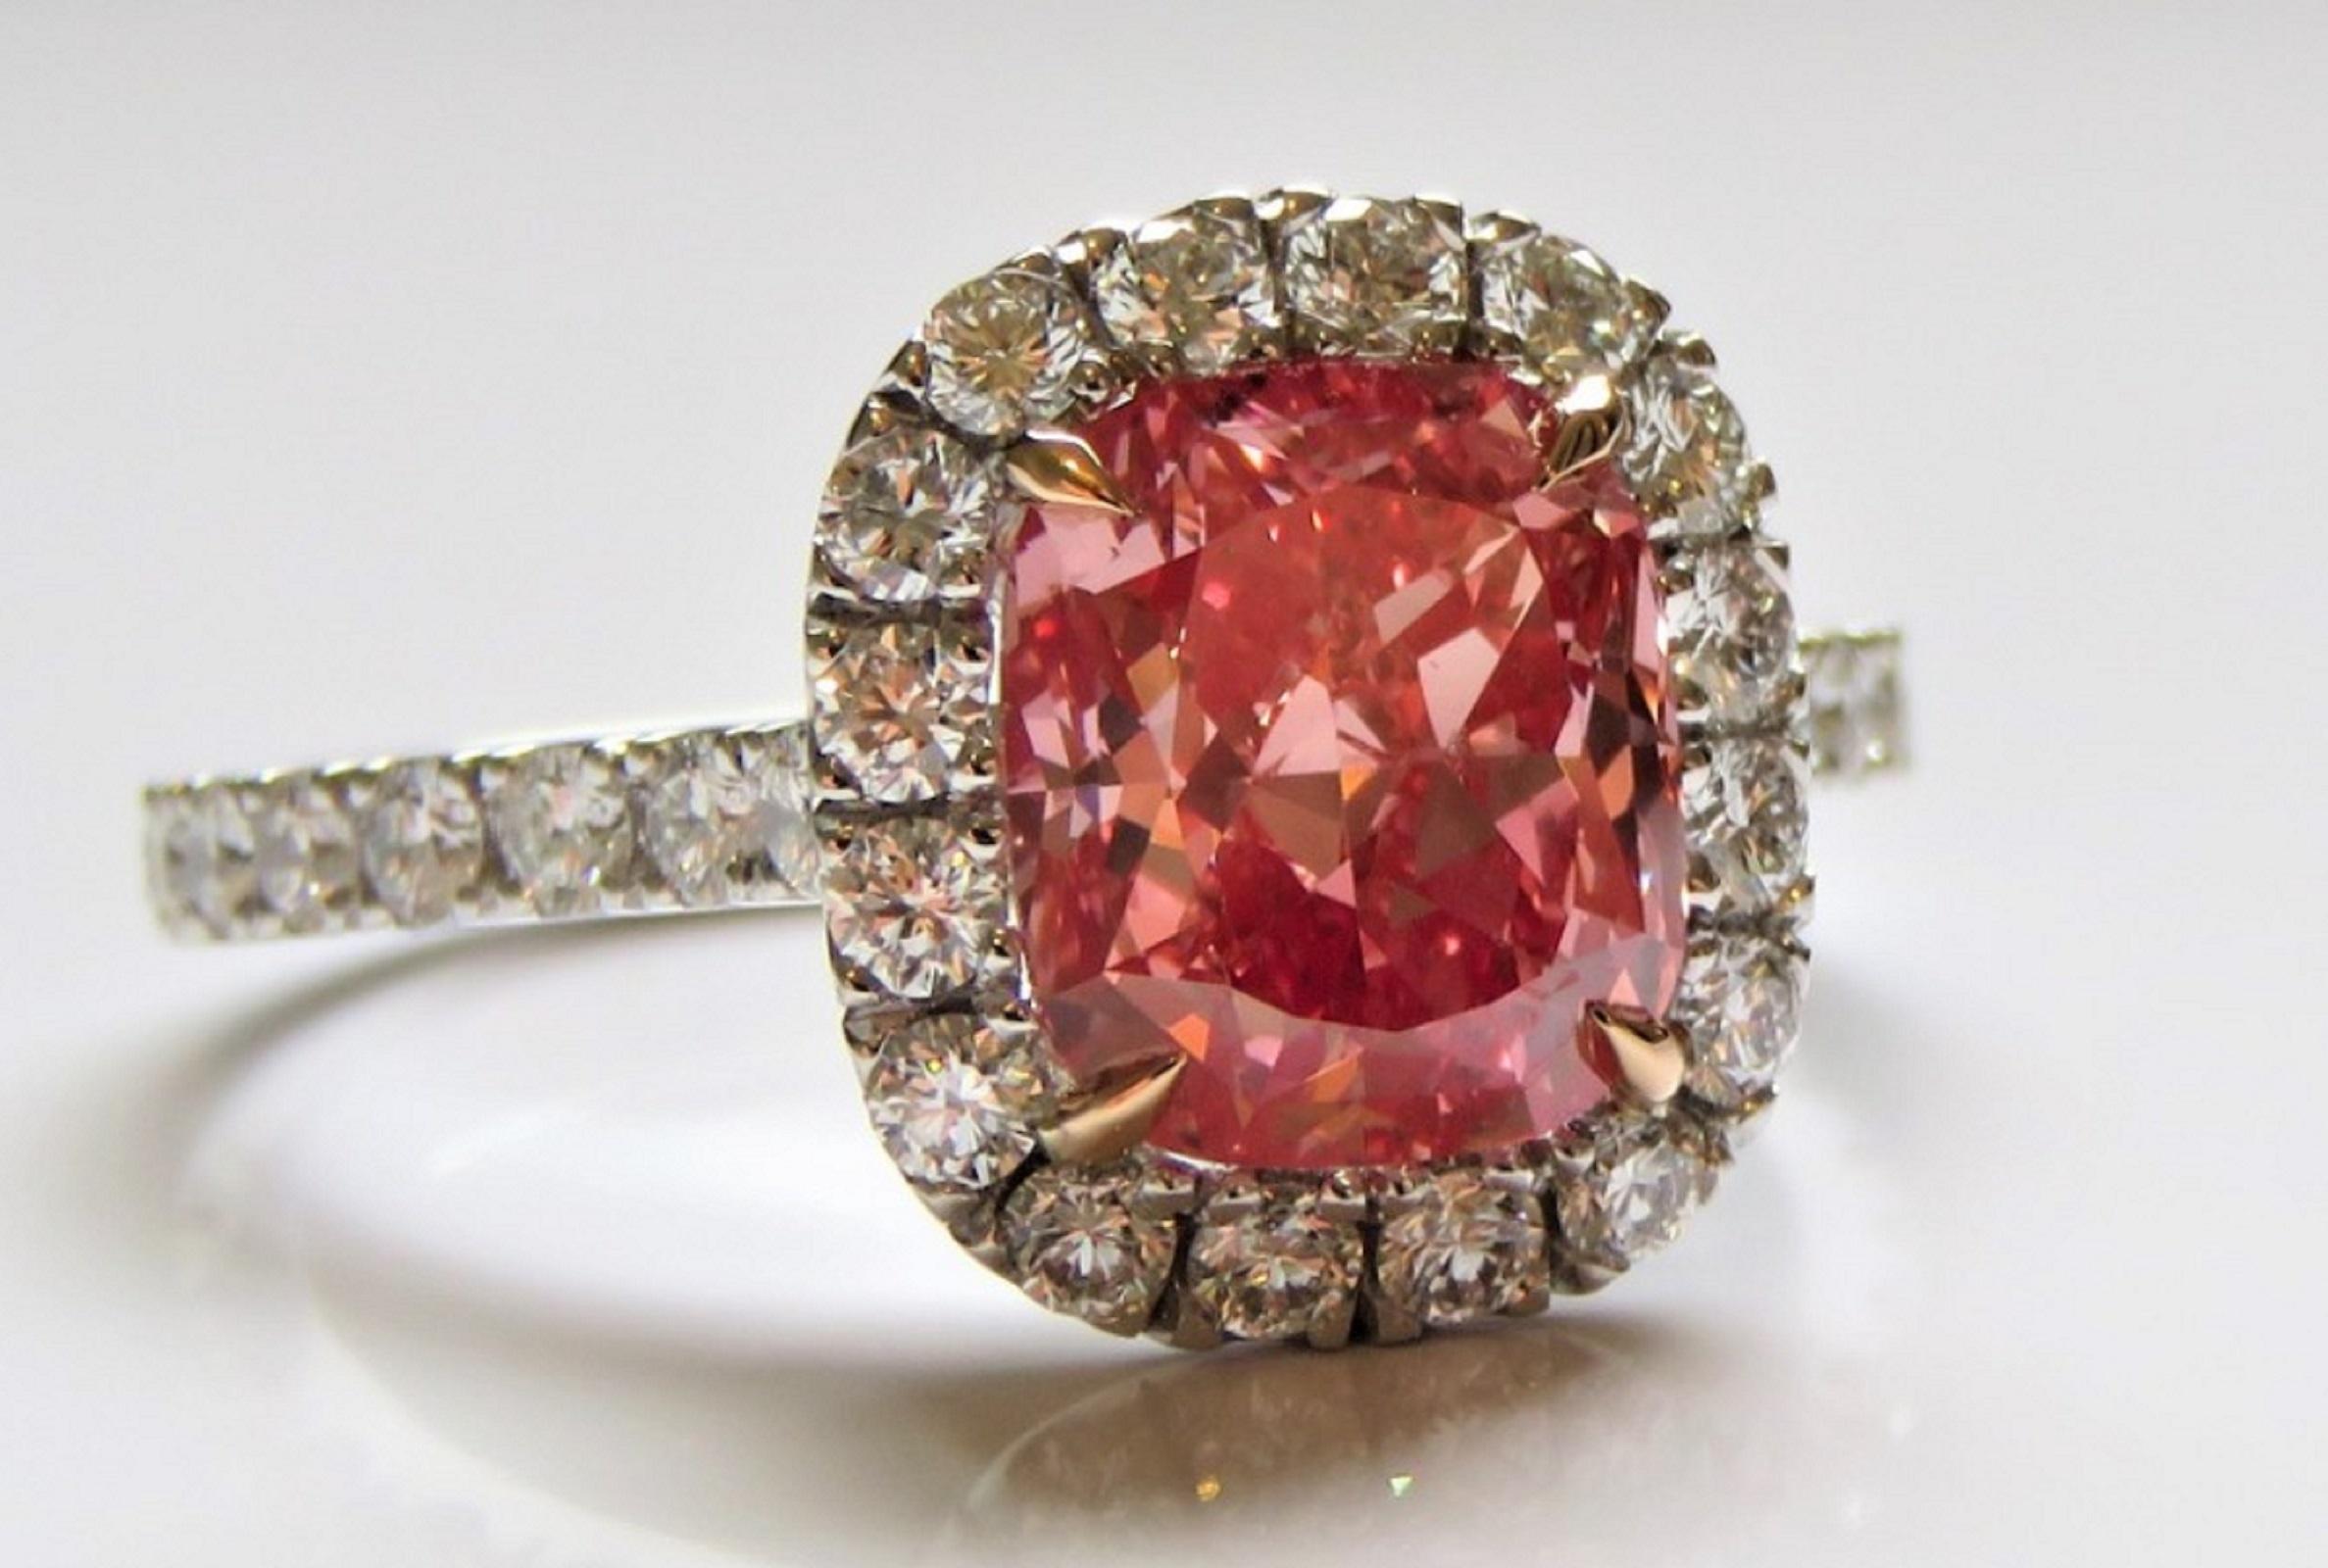 An exquisite ring composed by a stunning 2 carat fancy vivid orangy pink with an amazing saturation of color!

The ring is stunning!

The diamond is not only full of life and brilliance but is also 100% eye clean!
